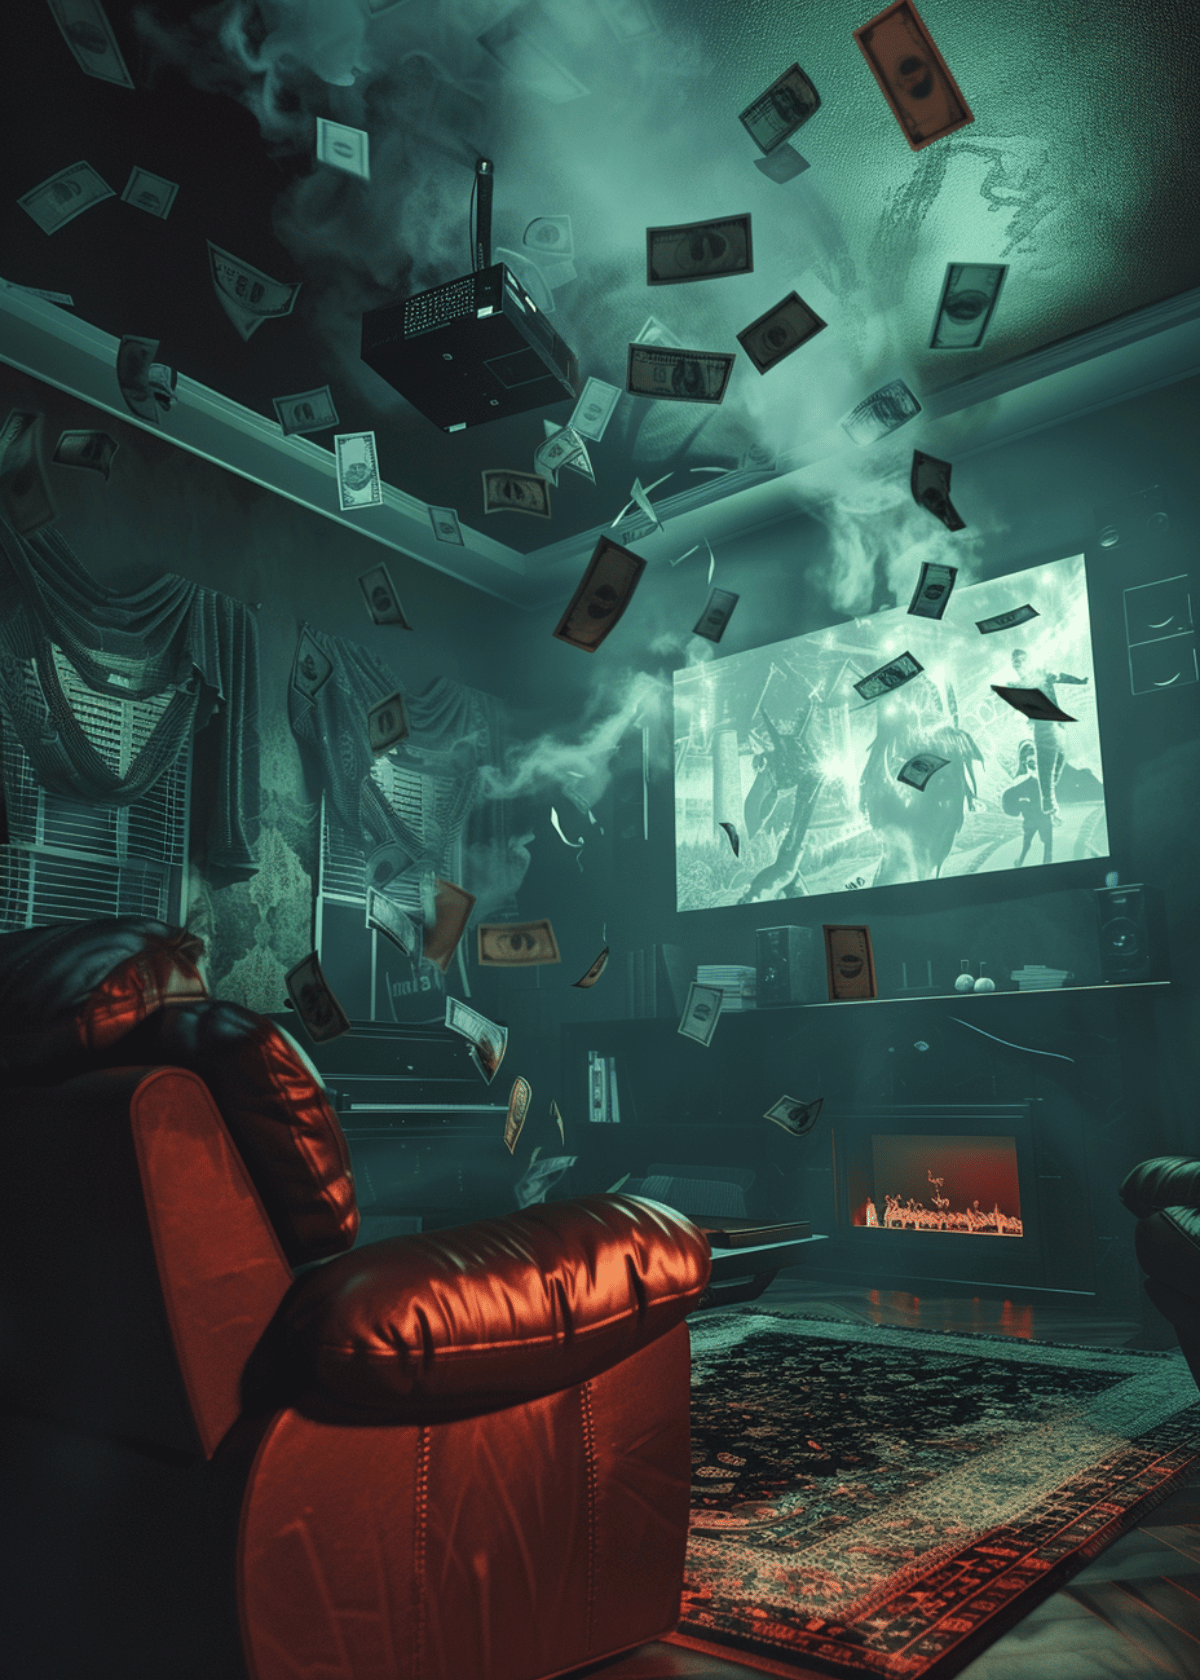 Turn Any Room Into A Movie Theatre With The Best Projector Under $1000! 🎥🍿